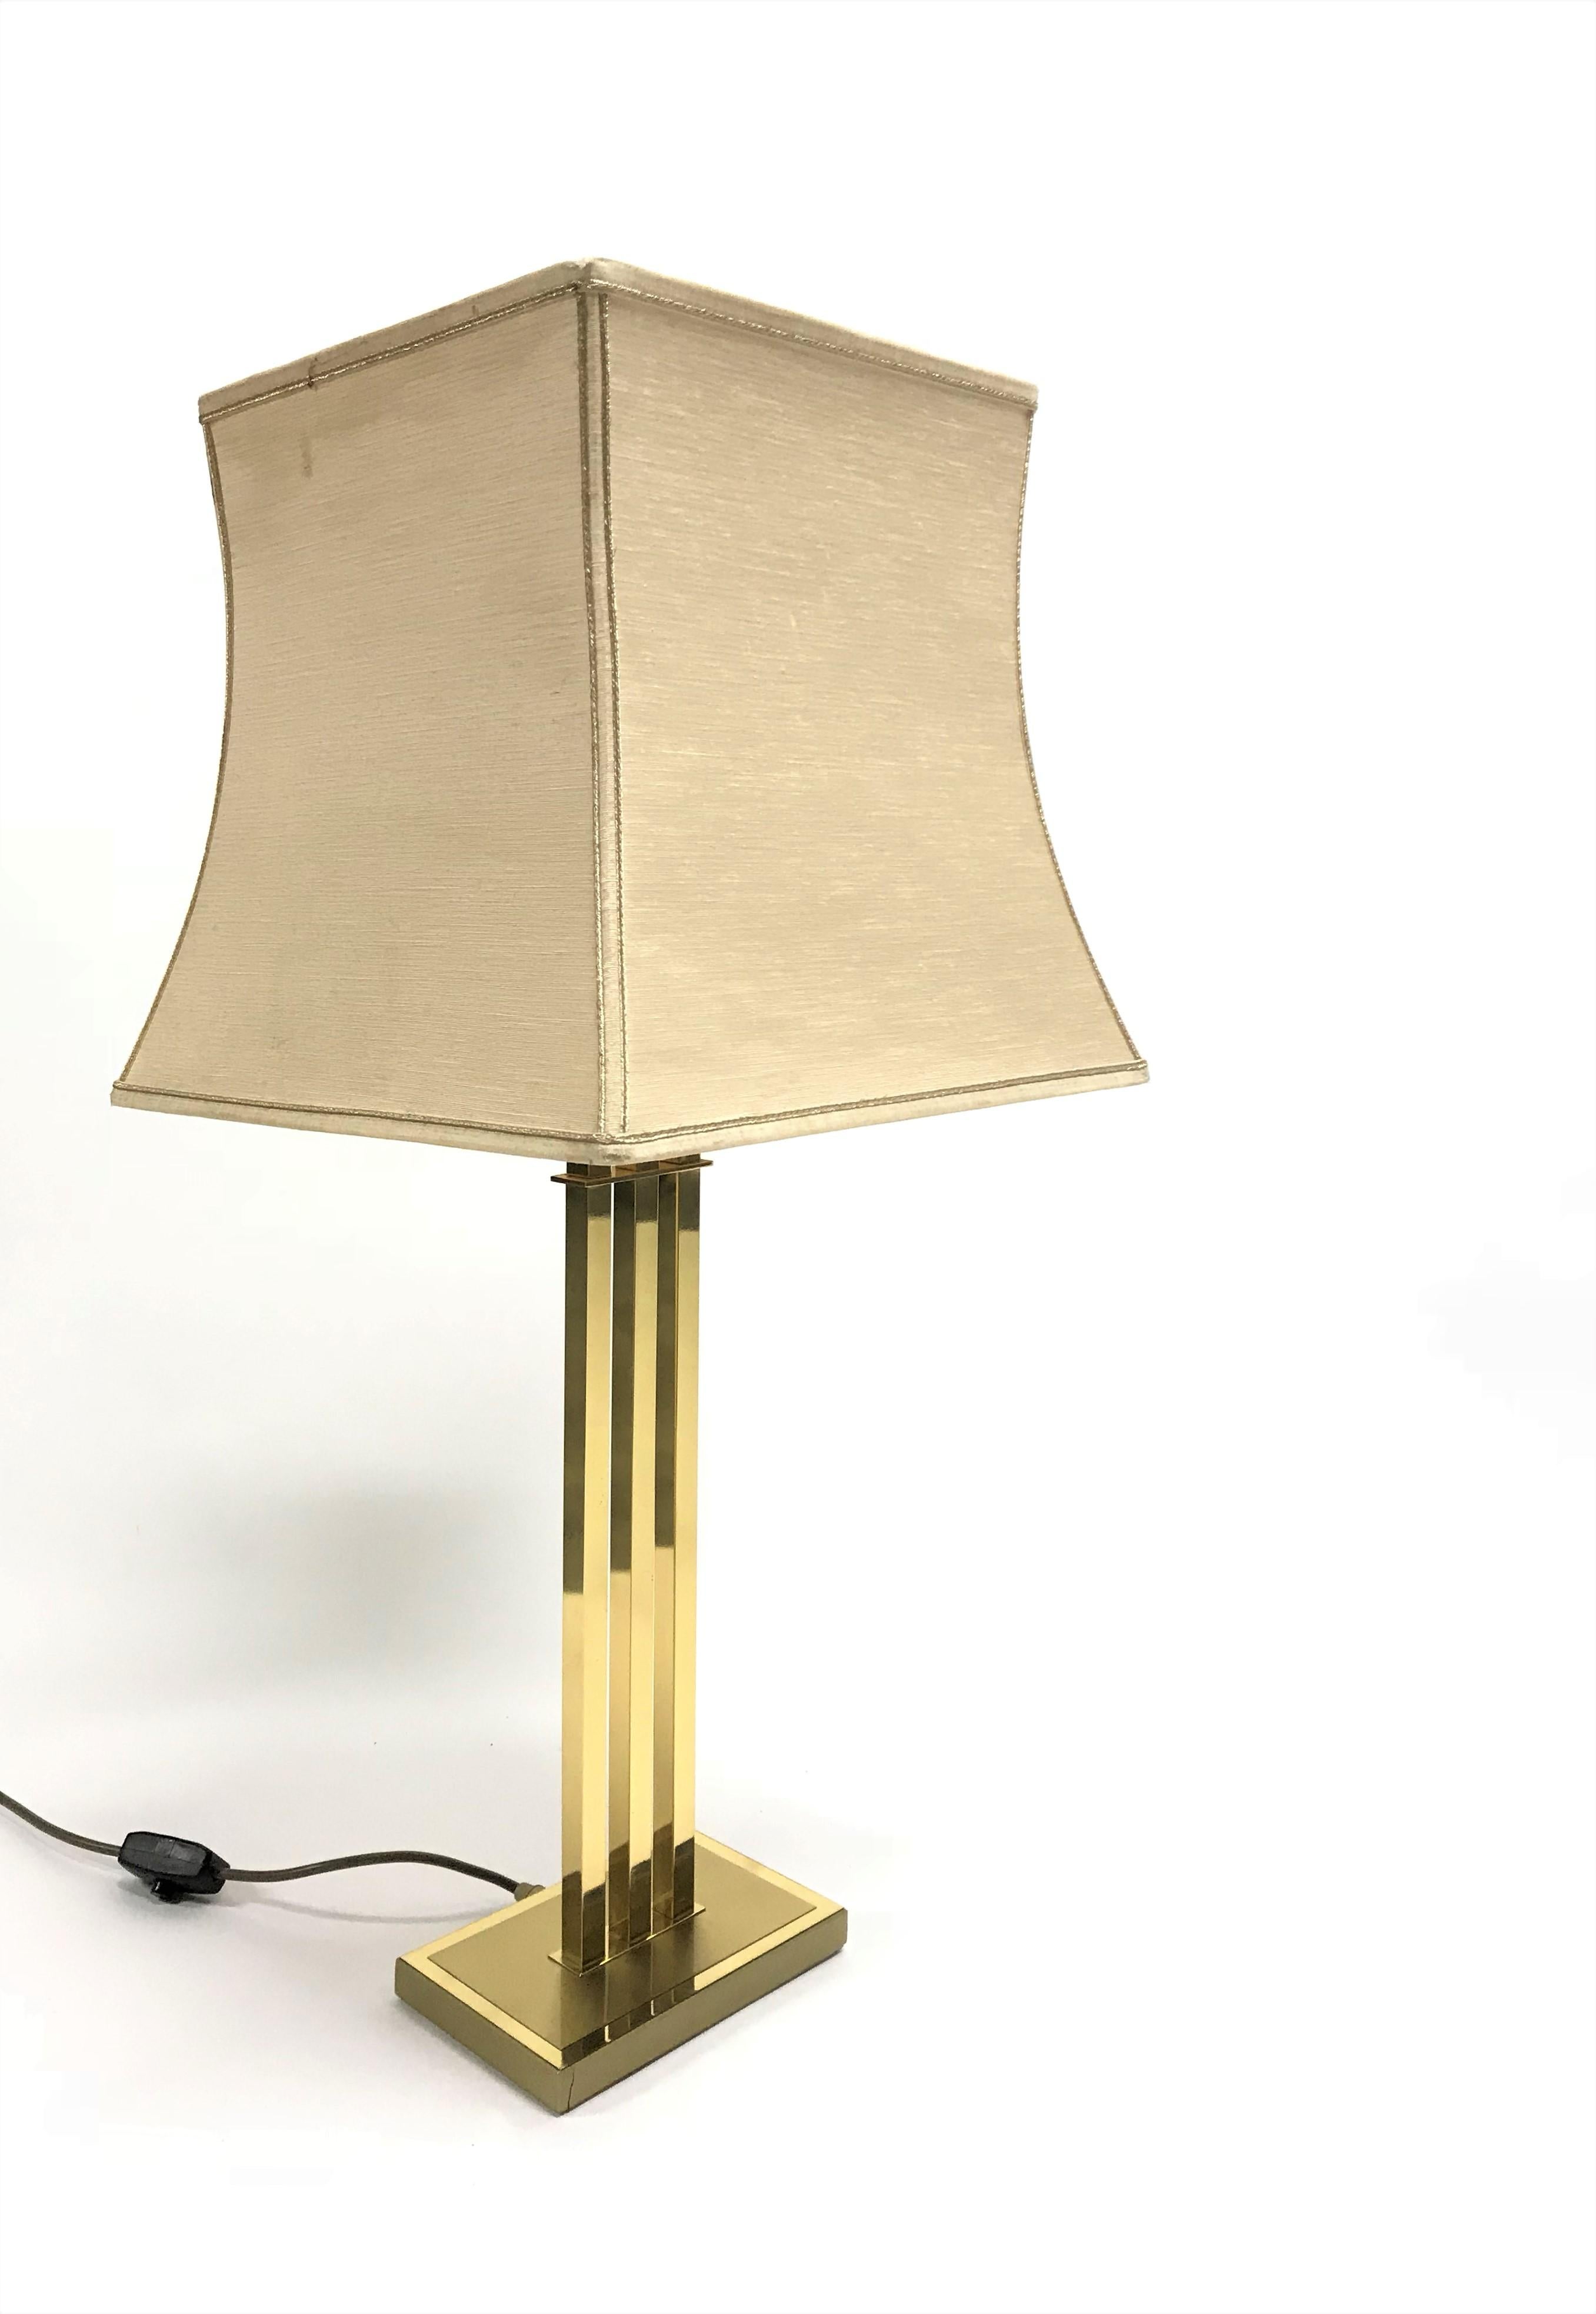 Late 20th Century Vintage Brass Table Lamp by Willy Rizzo for Deknudt, 1970s